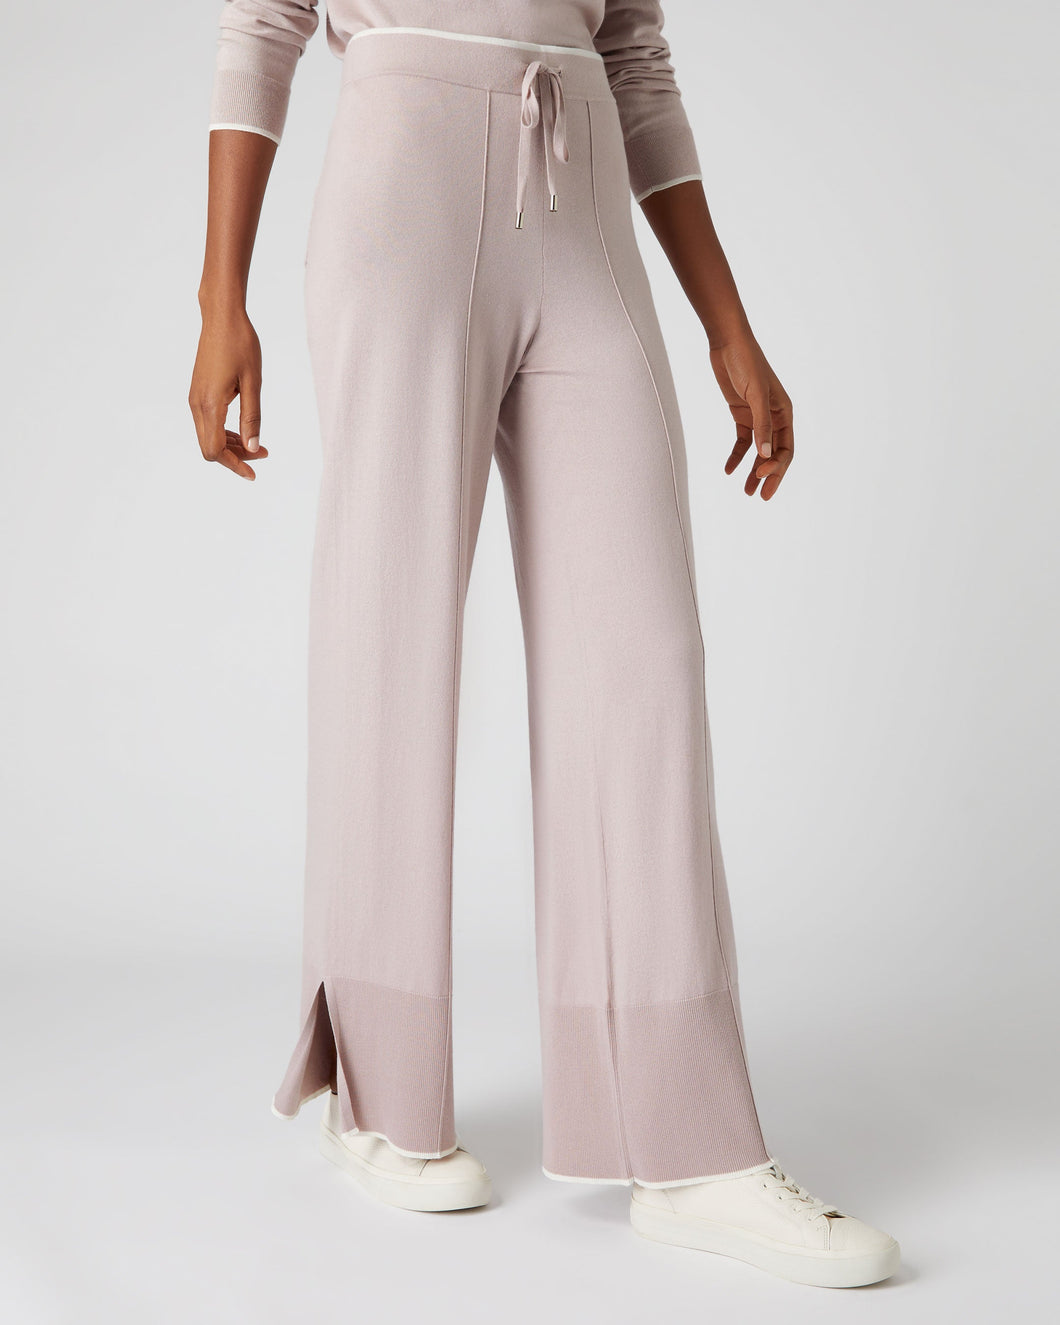 N.Peal Women's Cotton Cashmere Trousers Dune Pink